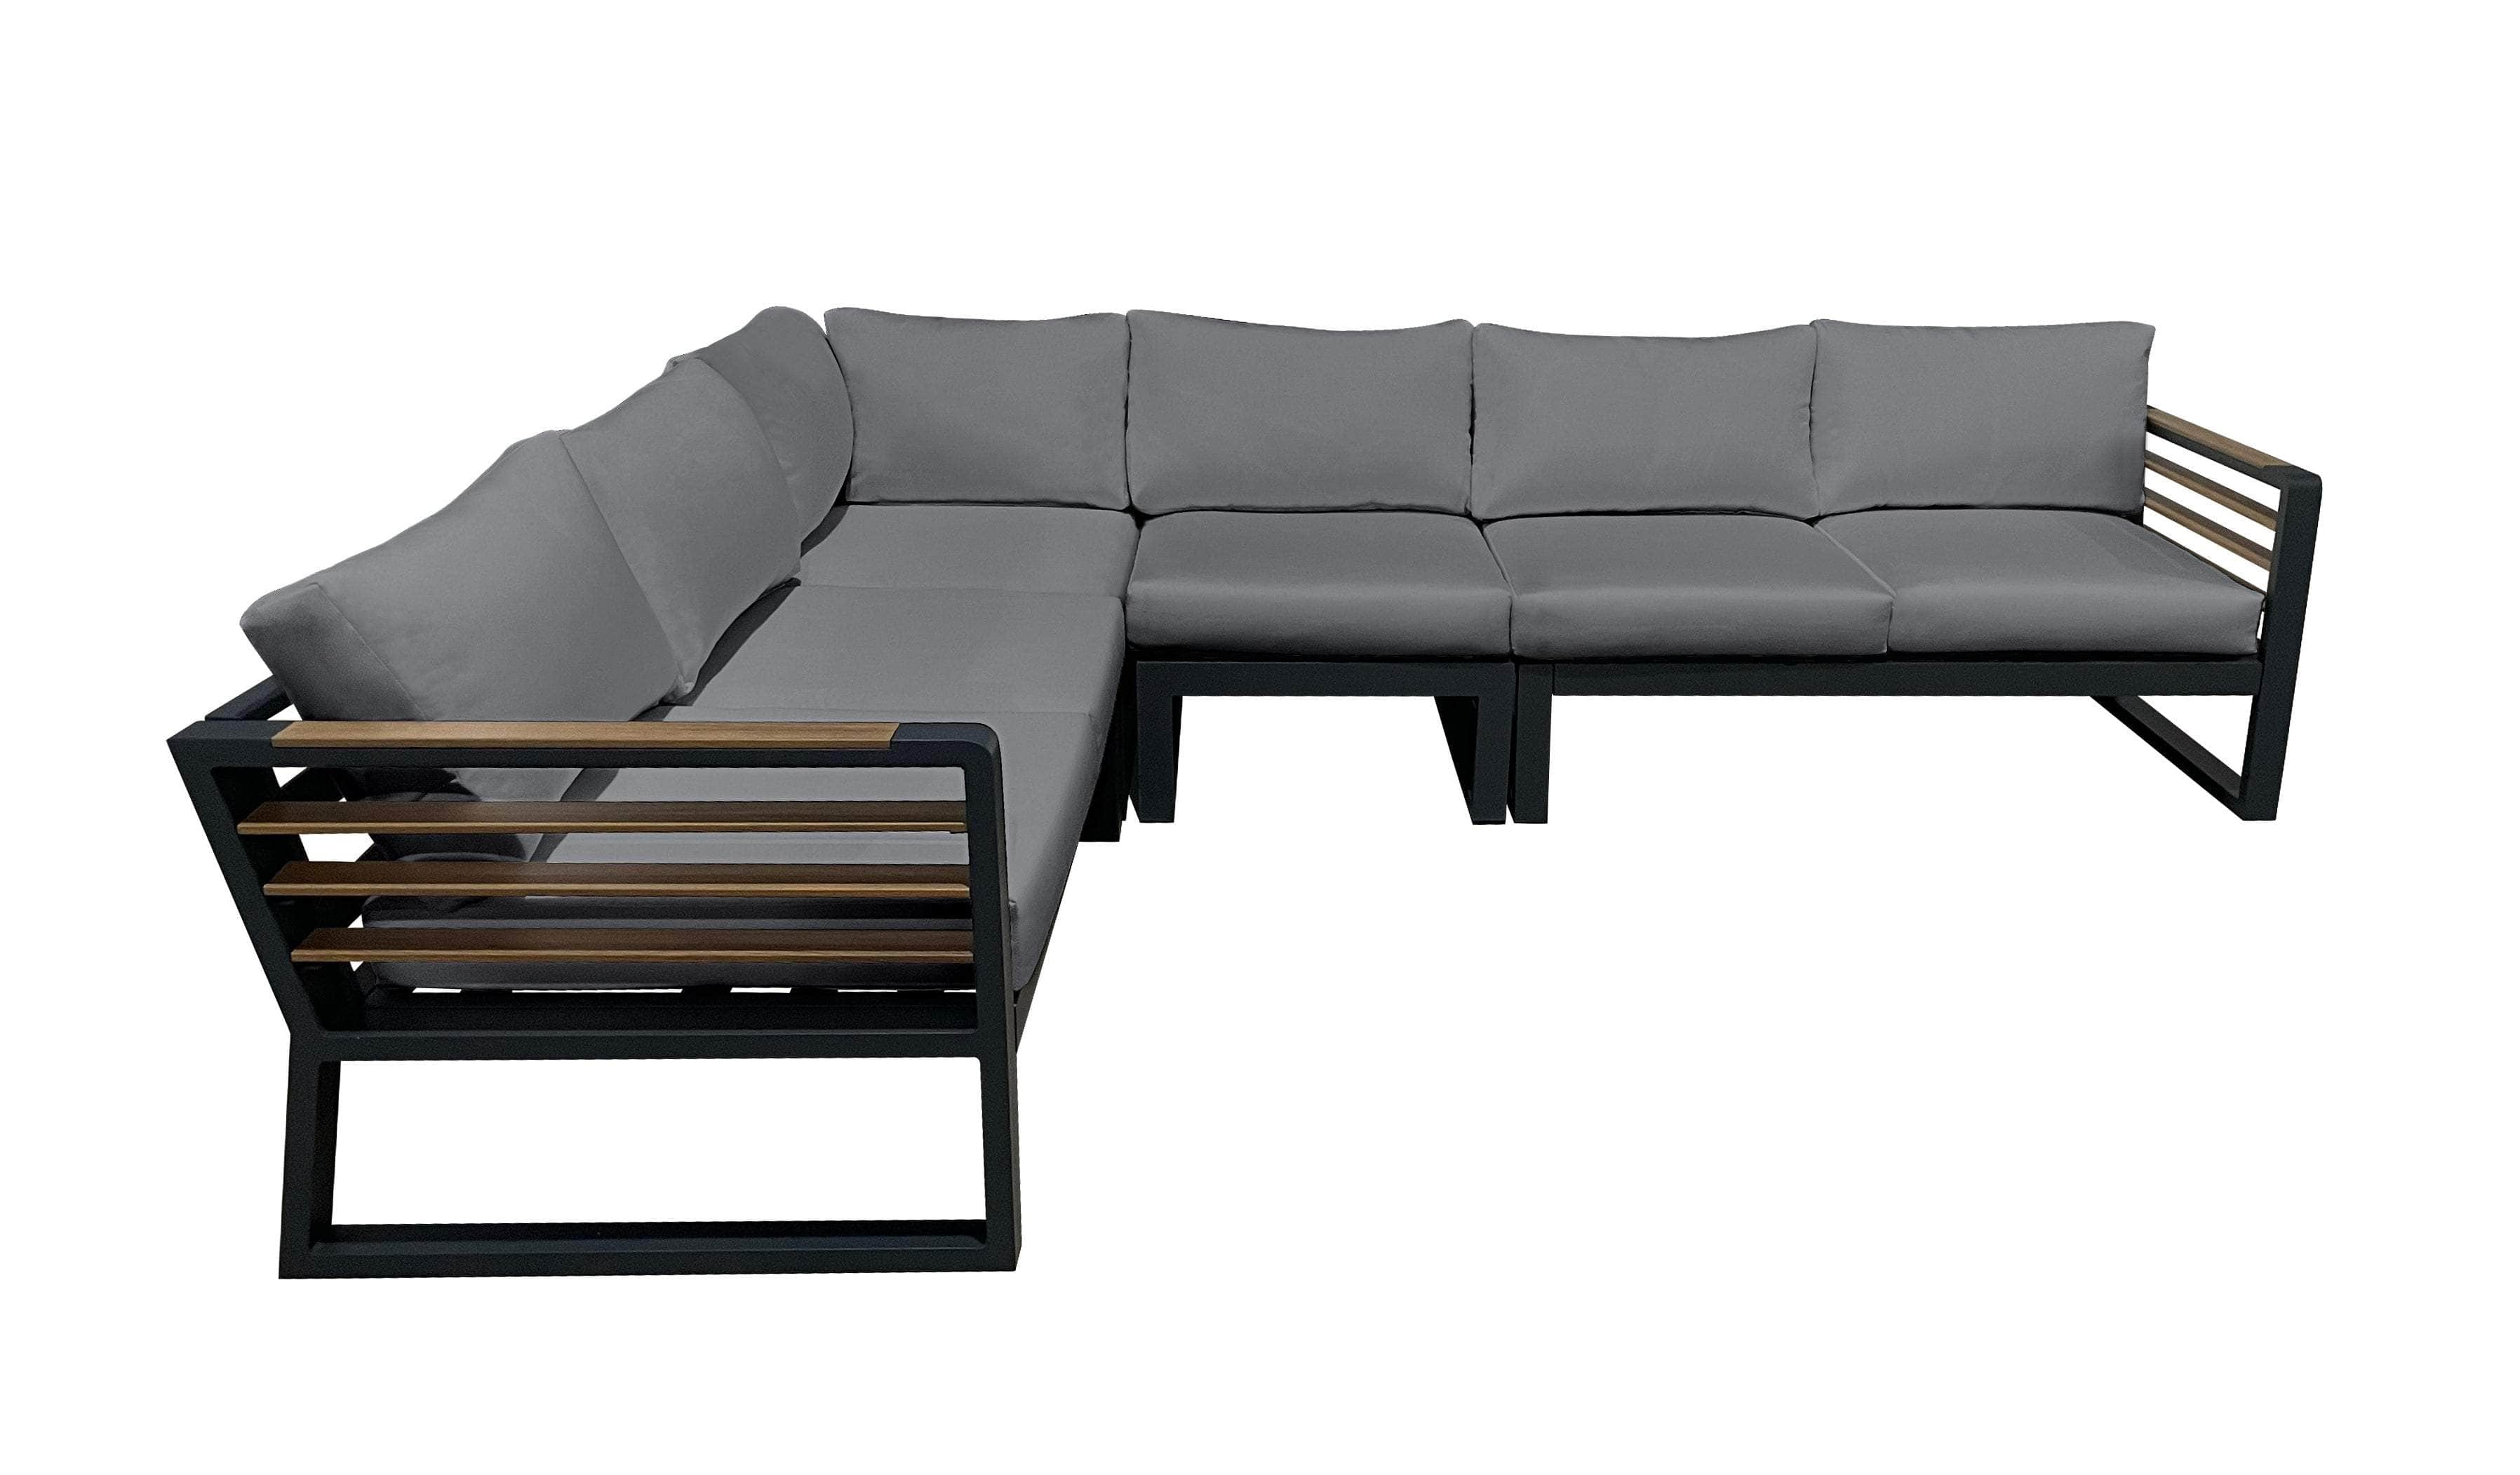 Pending - Cieux Avignon Outdoor Patio Aluminum Metal L-Shaped Sectional Sofa in Black with Sunbrella Cushions - Available in 2 Colours